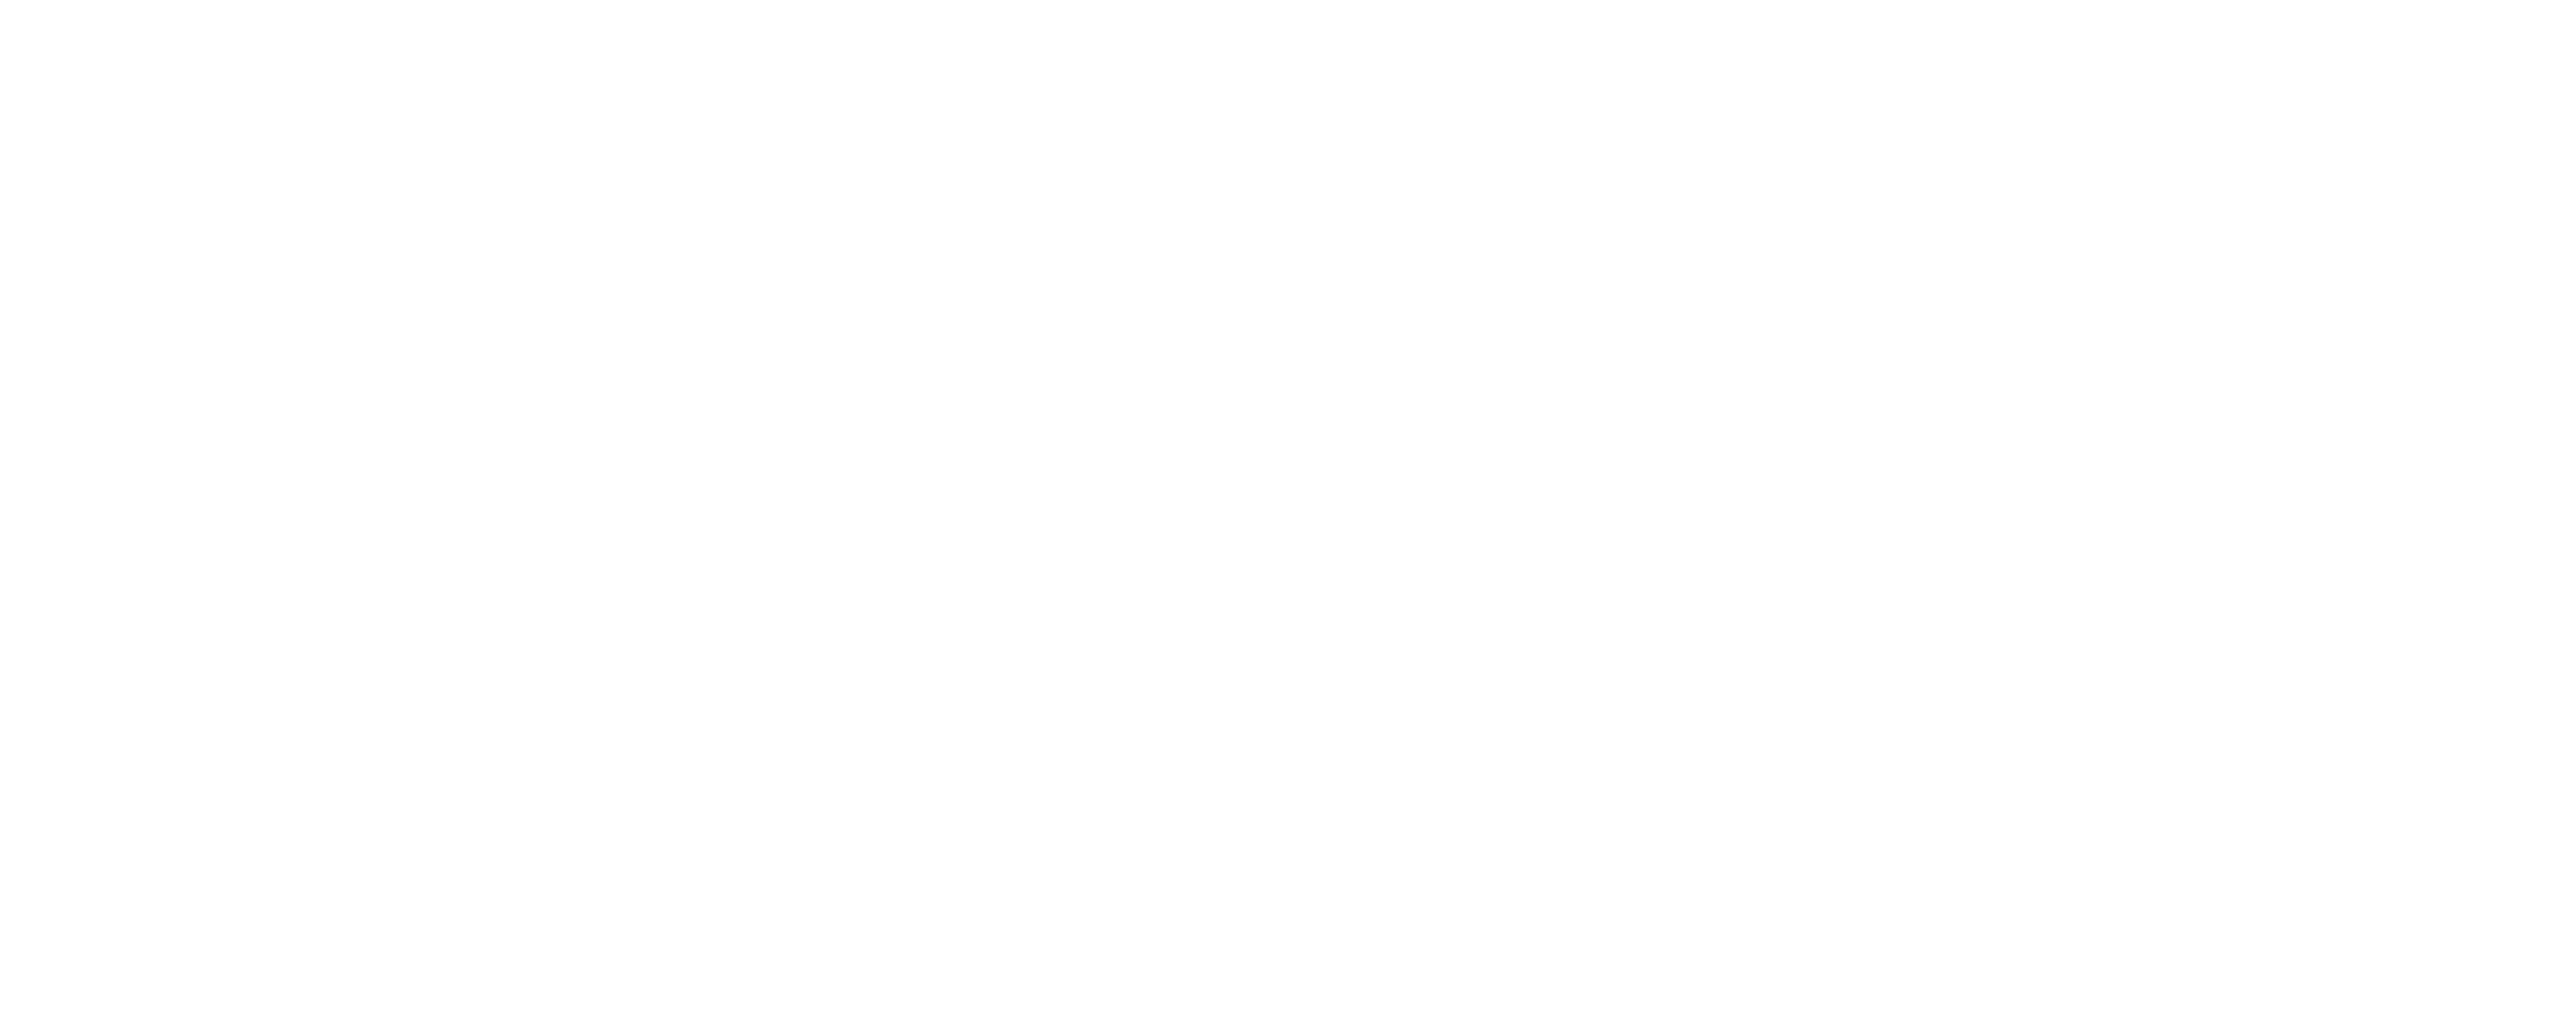 Decorative Lace Png Clip Art Image Gallery Yopriceville High Quality Images And Transparent Png Free Clipart